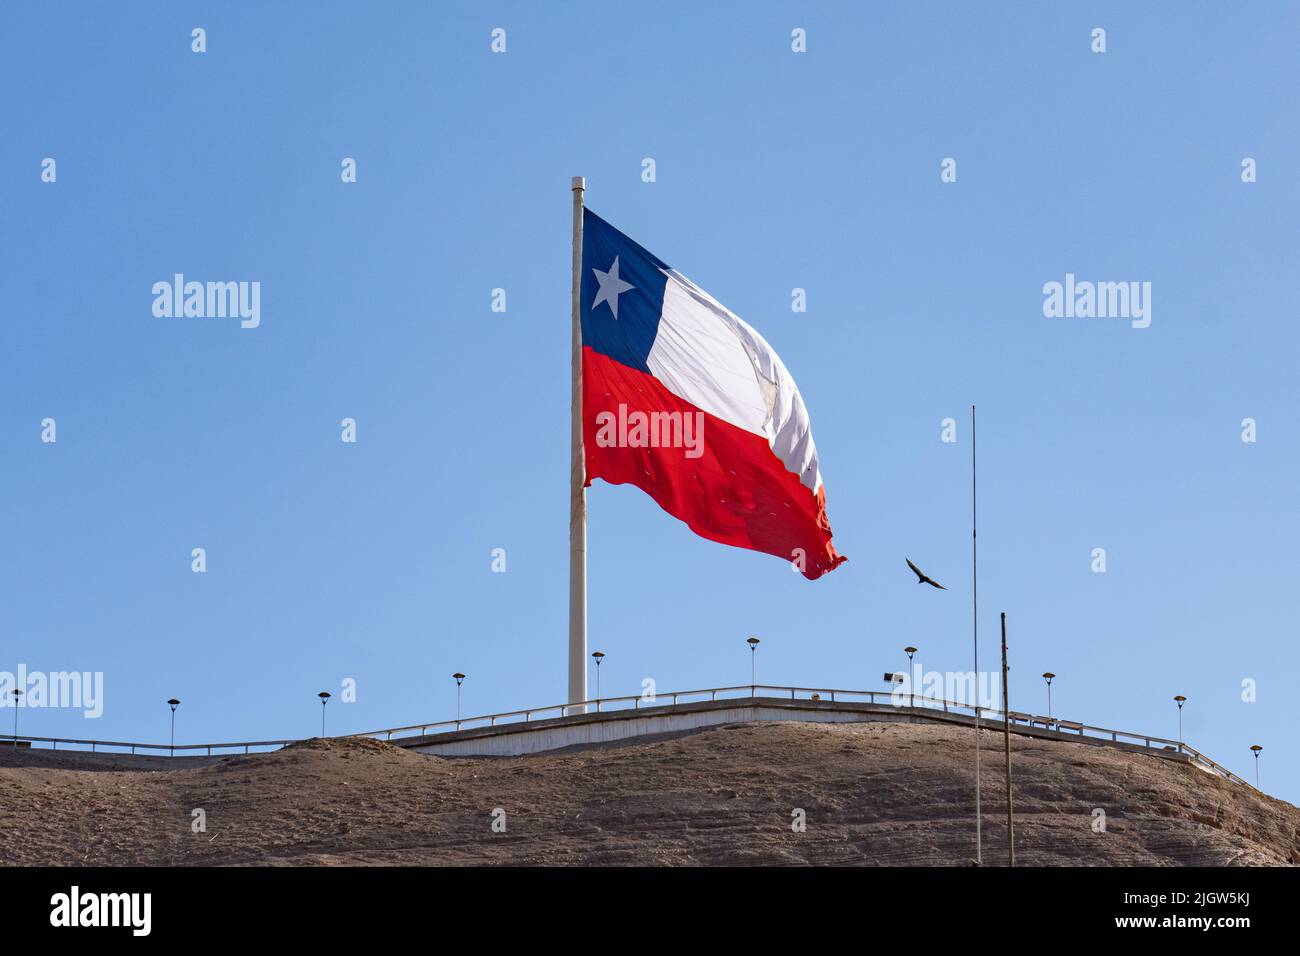 A giant Chilean flag flies on top of the El Morro hill overlooking the city of Arica, Chile. Stock Photo